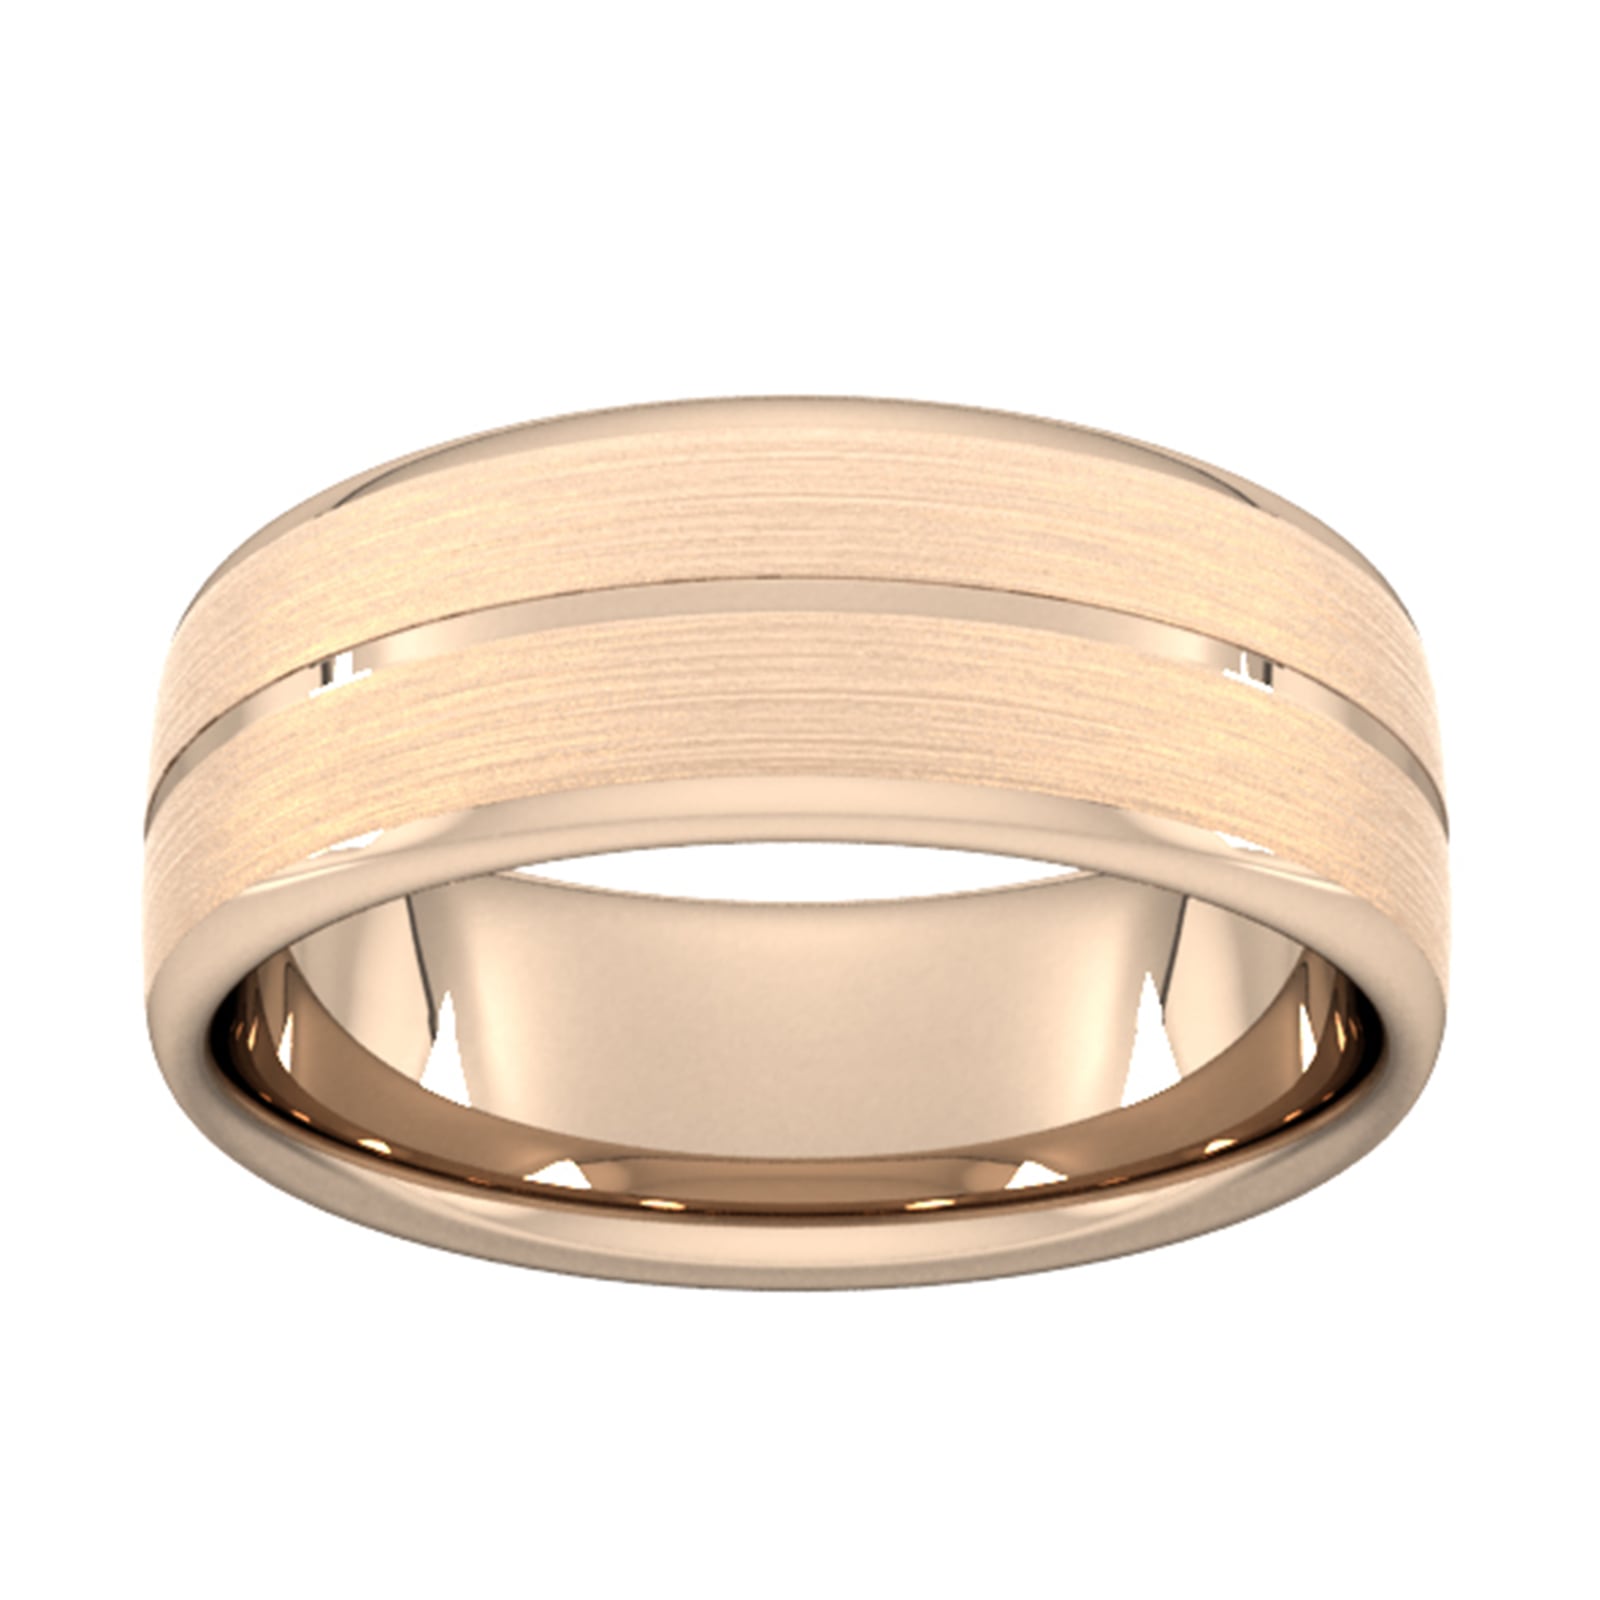 8mm Slight Court Extra Heavy Centre Groove With Chamfered Edge Wedding Ring In 18 Carat Rose Gold - Ring Size M